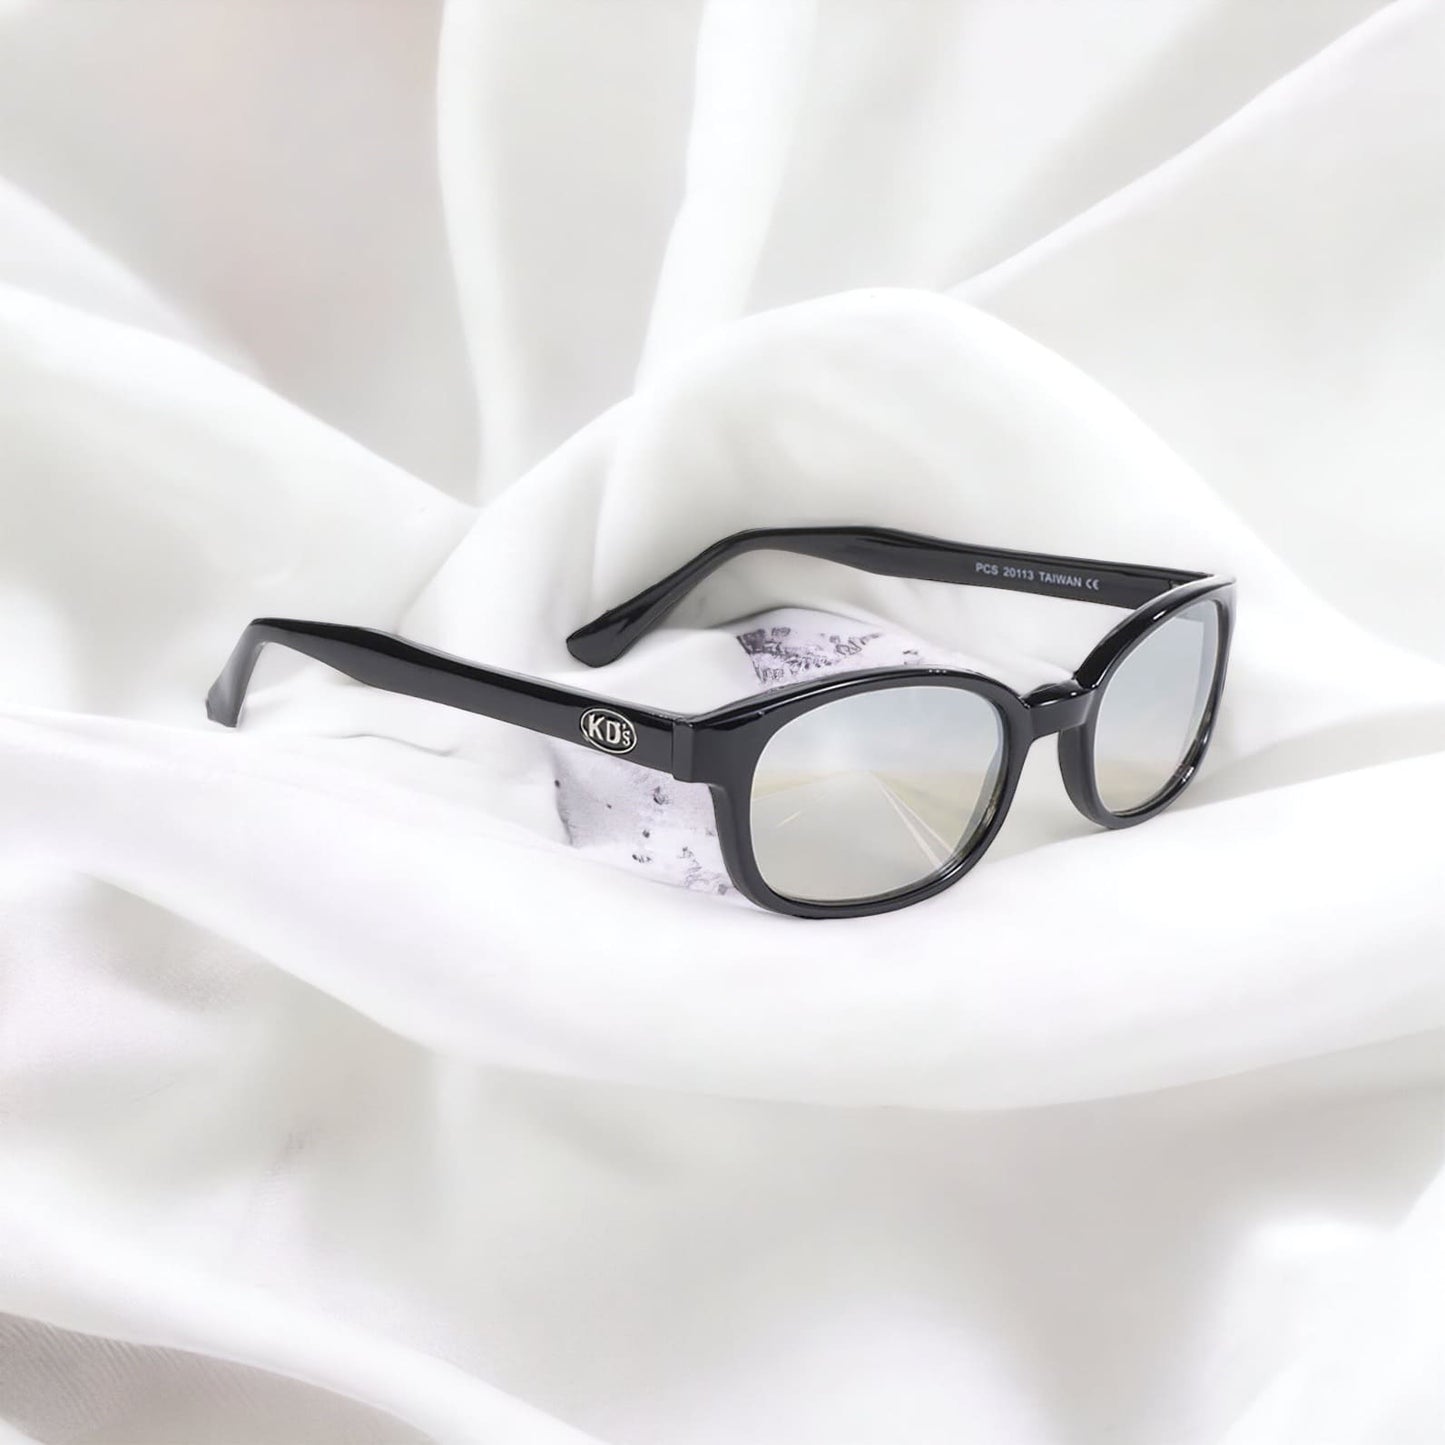 KD's 20113 sunglasses that fit under a motorcycle or ski helmet. With a classic black frame and clear silver mirror lenses set on a white silk sheet.